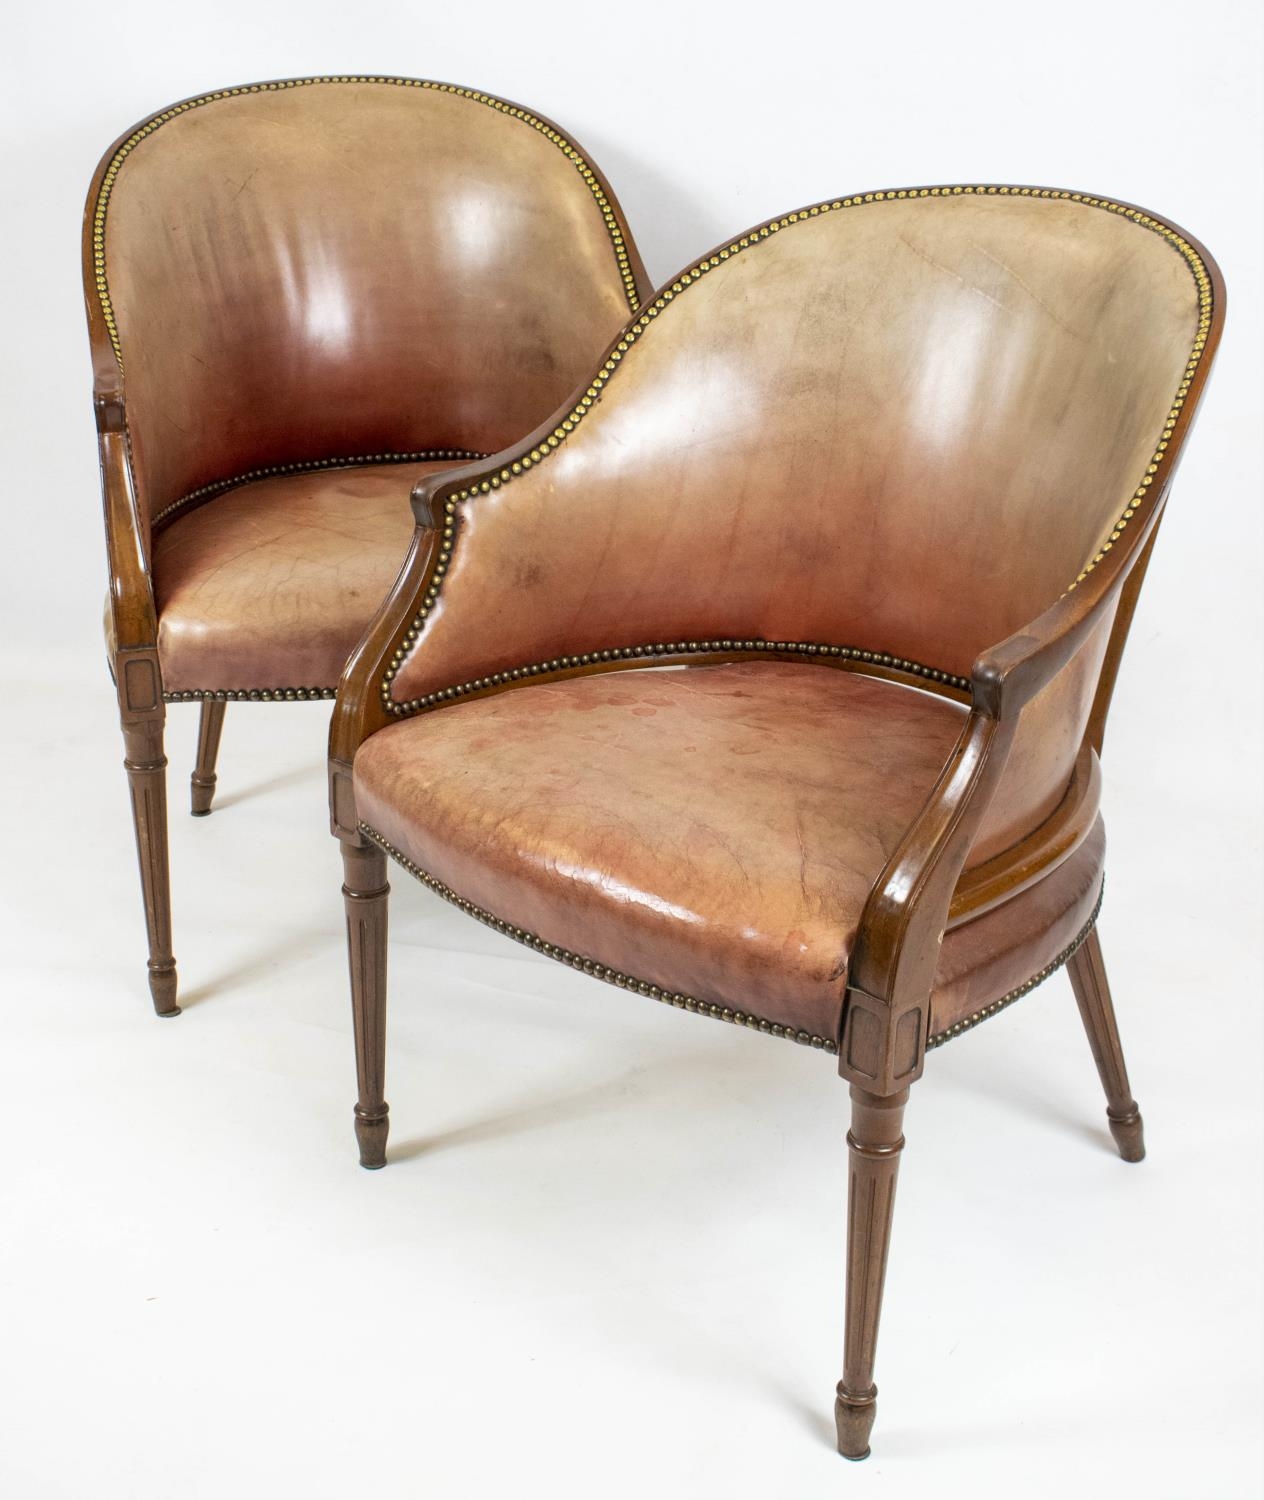 LIBRARY TUB CHAIRS, 85cm H x 62cm, a pair, George III style mahogany and leather upholstered. (2)